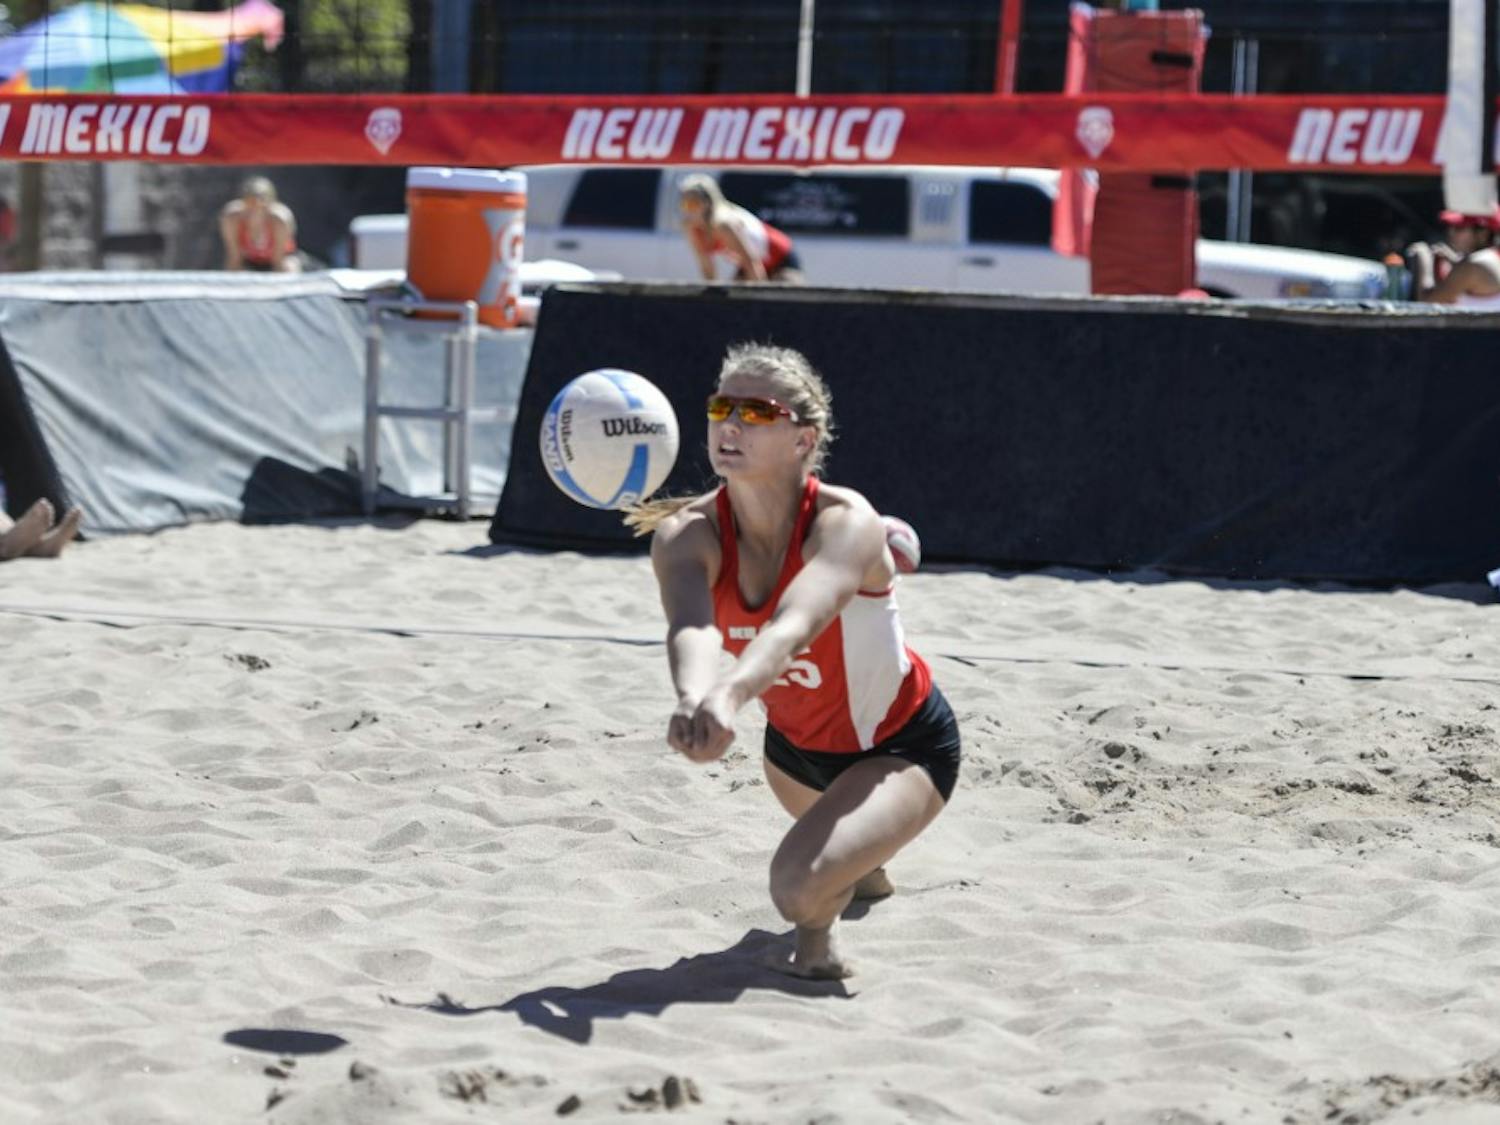 Junior Lise Rugland dives for the ball while playing MCU at Lucky 66 Bowl’s sand volleyball courts. The Lobos compete in the Cowtown Classic this Friday and Saturday in Fort Worth, Texas.